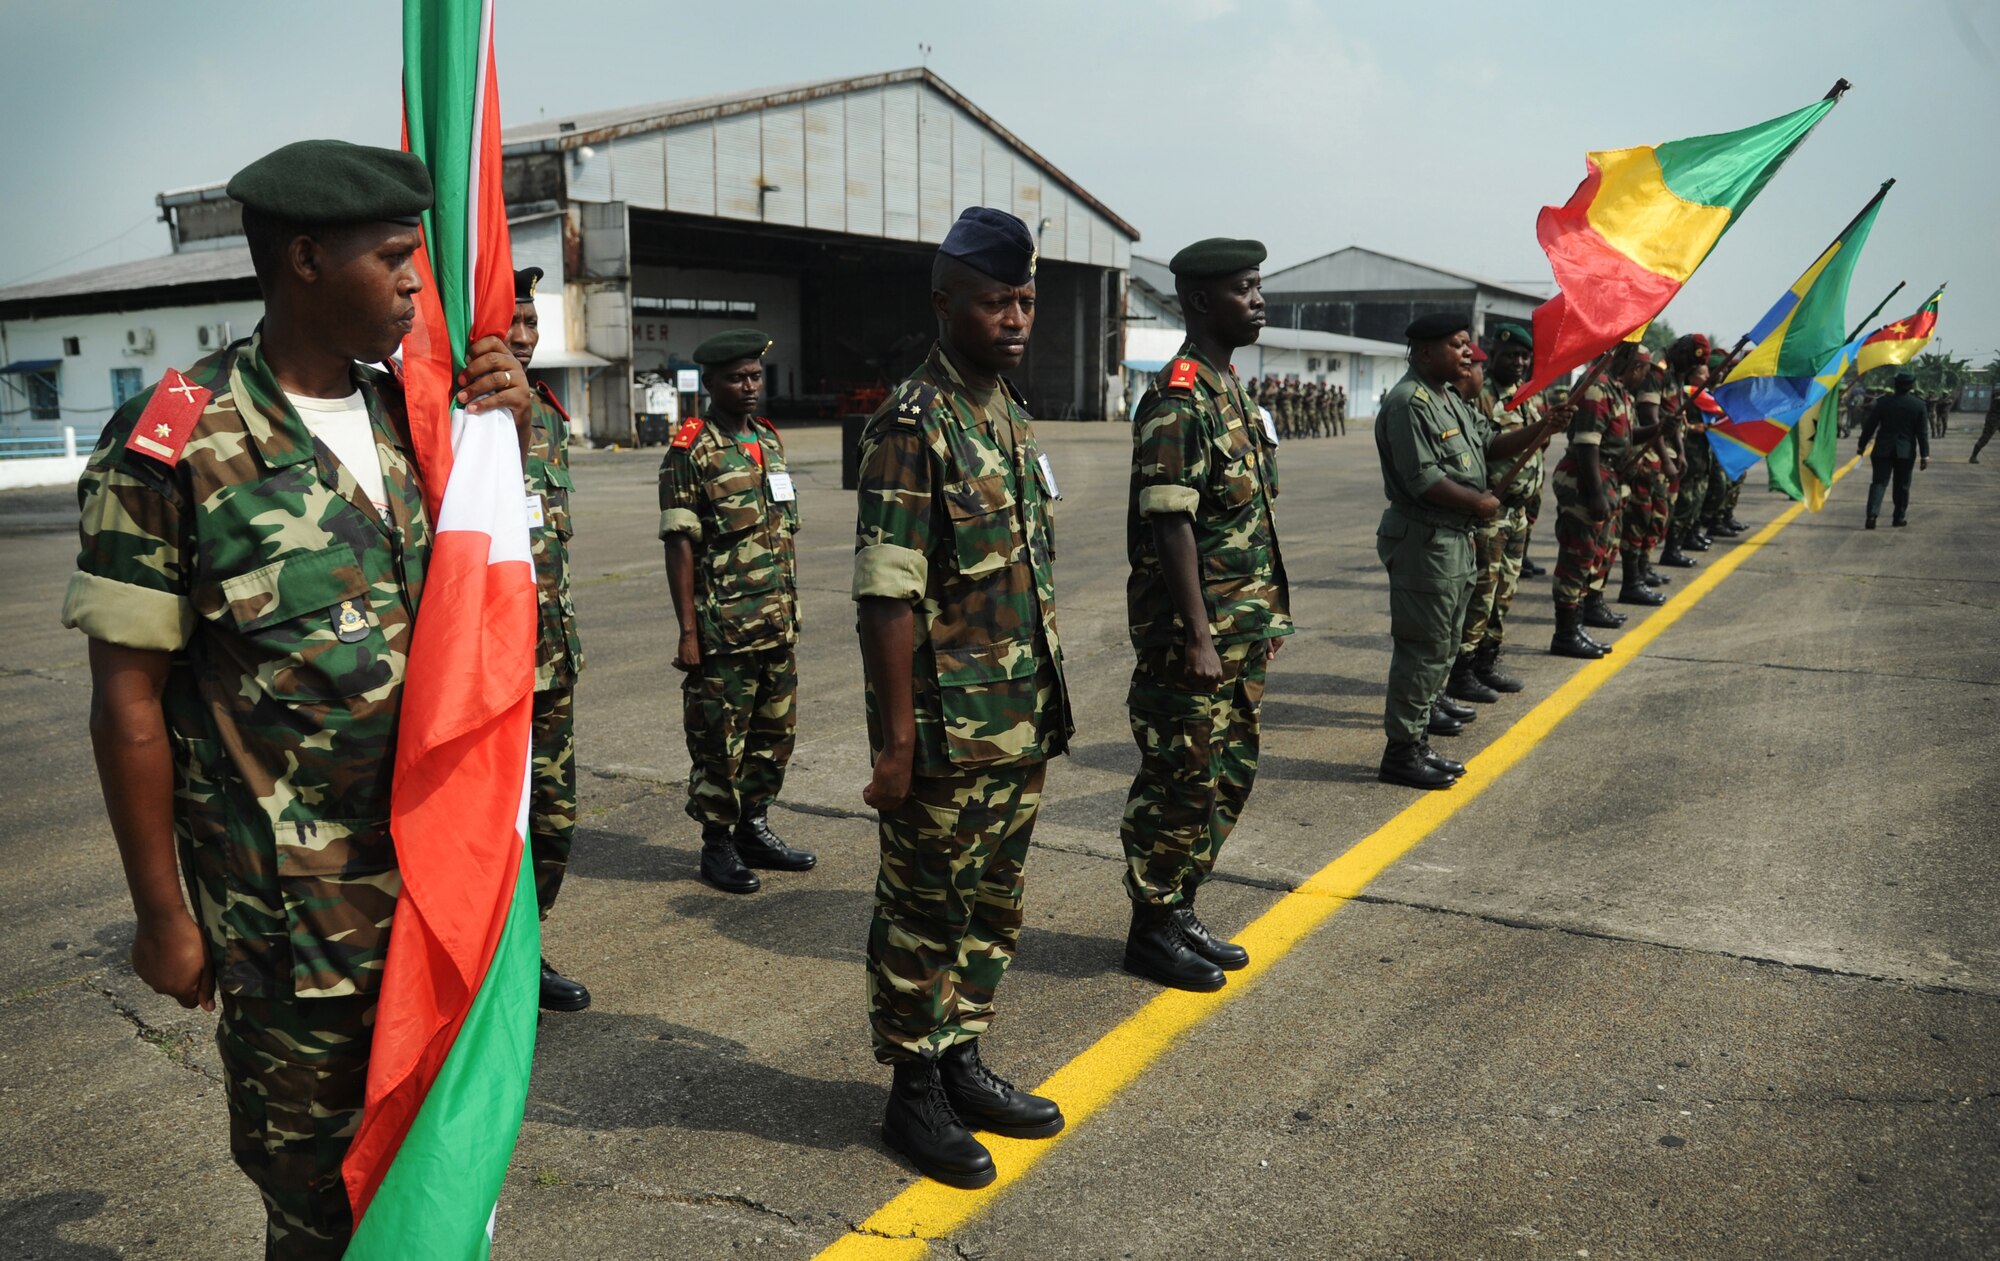 DOUALA, CAMEROON – African partner nation participants stand in formation during the opening ceremony for Central Accord 2013, at Douala Air Force Base, Douala, Cameroon, Feb. 20, 2013. Central Accord 2013 is a joint exercise in which U.S., Cameroon and neighboring Central African militaries partner to promote regional cooperation while and increasing aerial resupply and medical readiness capacity. (Photo by Master Sgt. MSgt Stan Parker, 621st CRW Public Affairs)